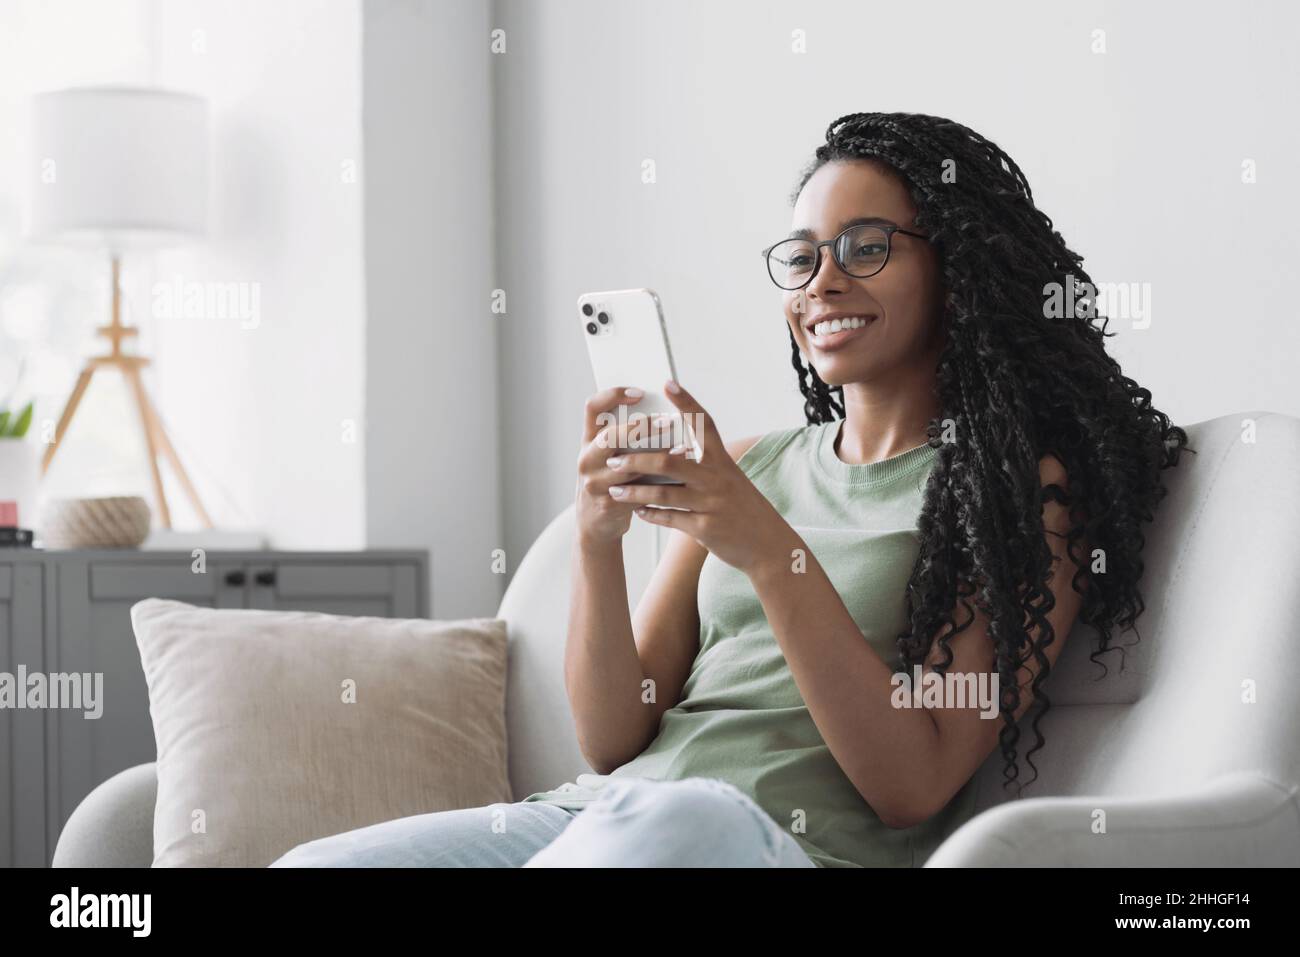 Woman using smartphone at home. Young woman looking at mobile phone. Mobile apps, technology, lockdown, web chat, lifestyle concept Stock Photo